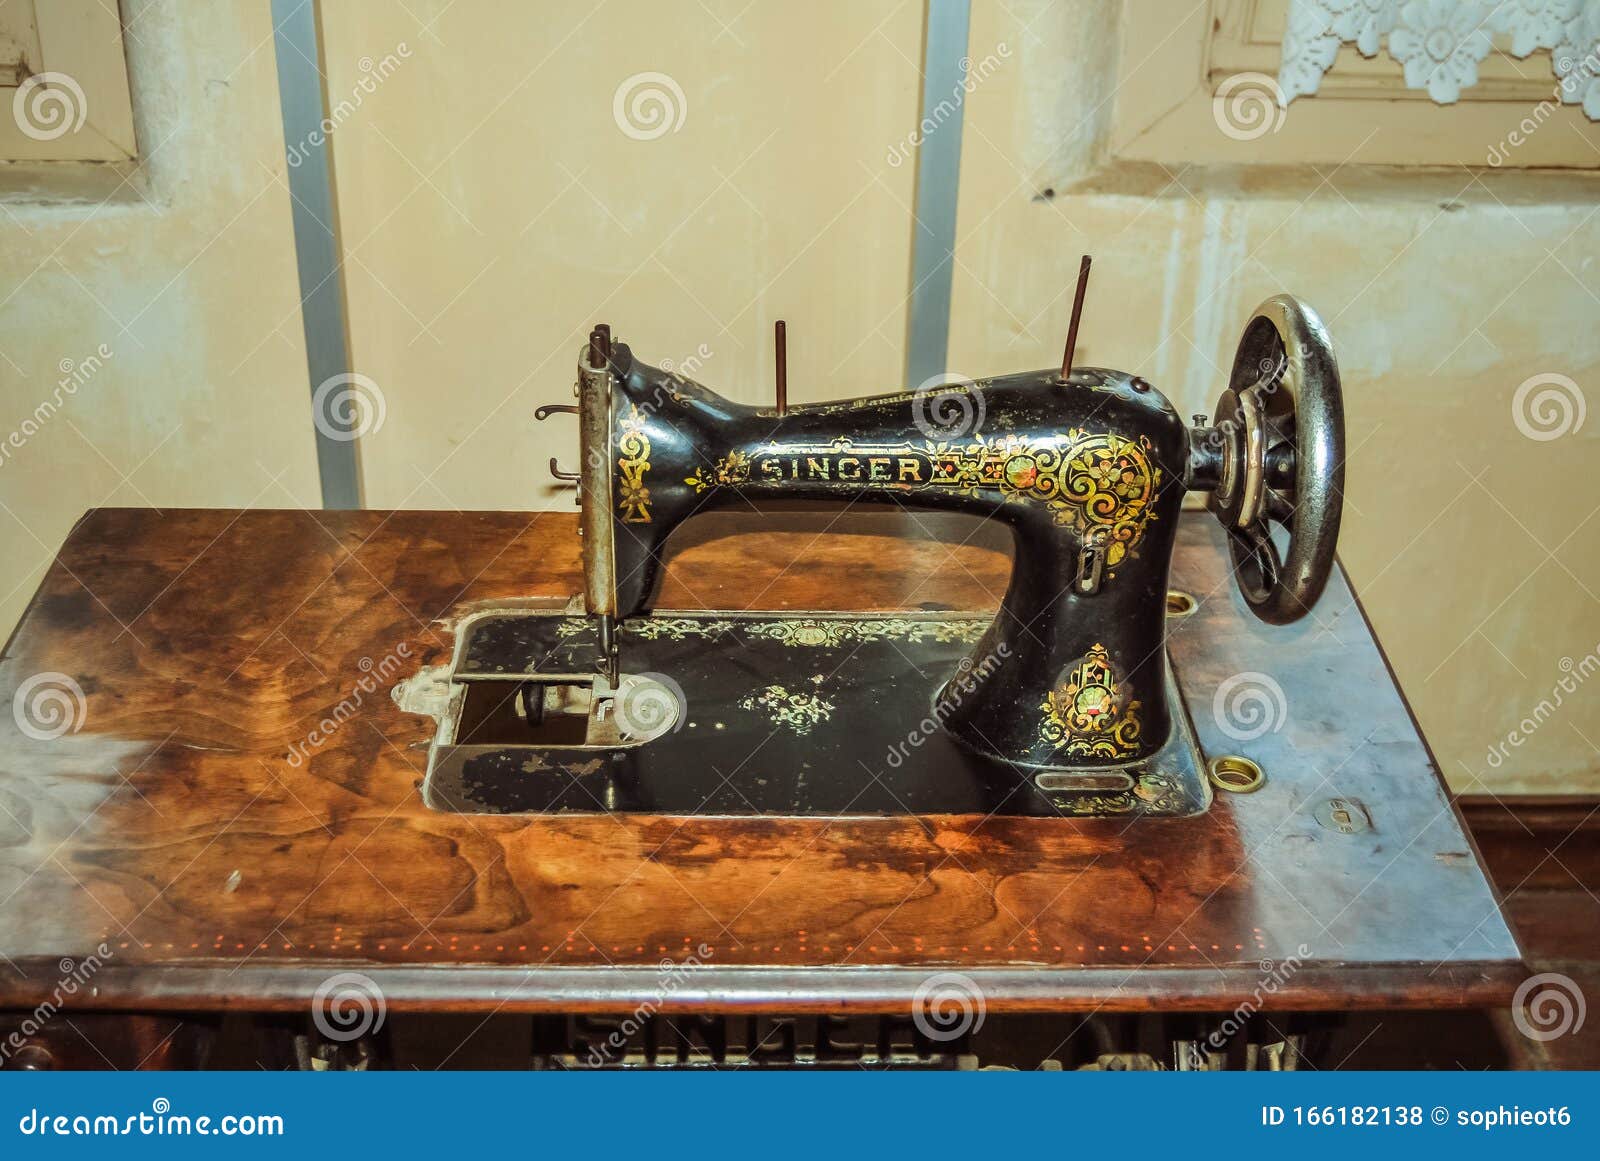 Vintage Antique Singer Sewing Machine. Accessories for Weaving Operations.  Editorial Photo - Image of round, factory: 72541676